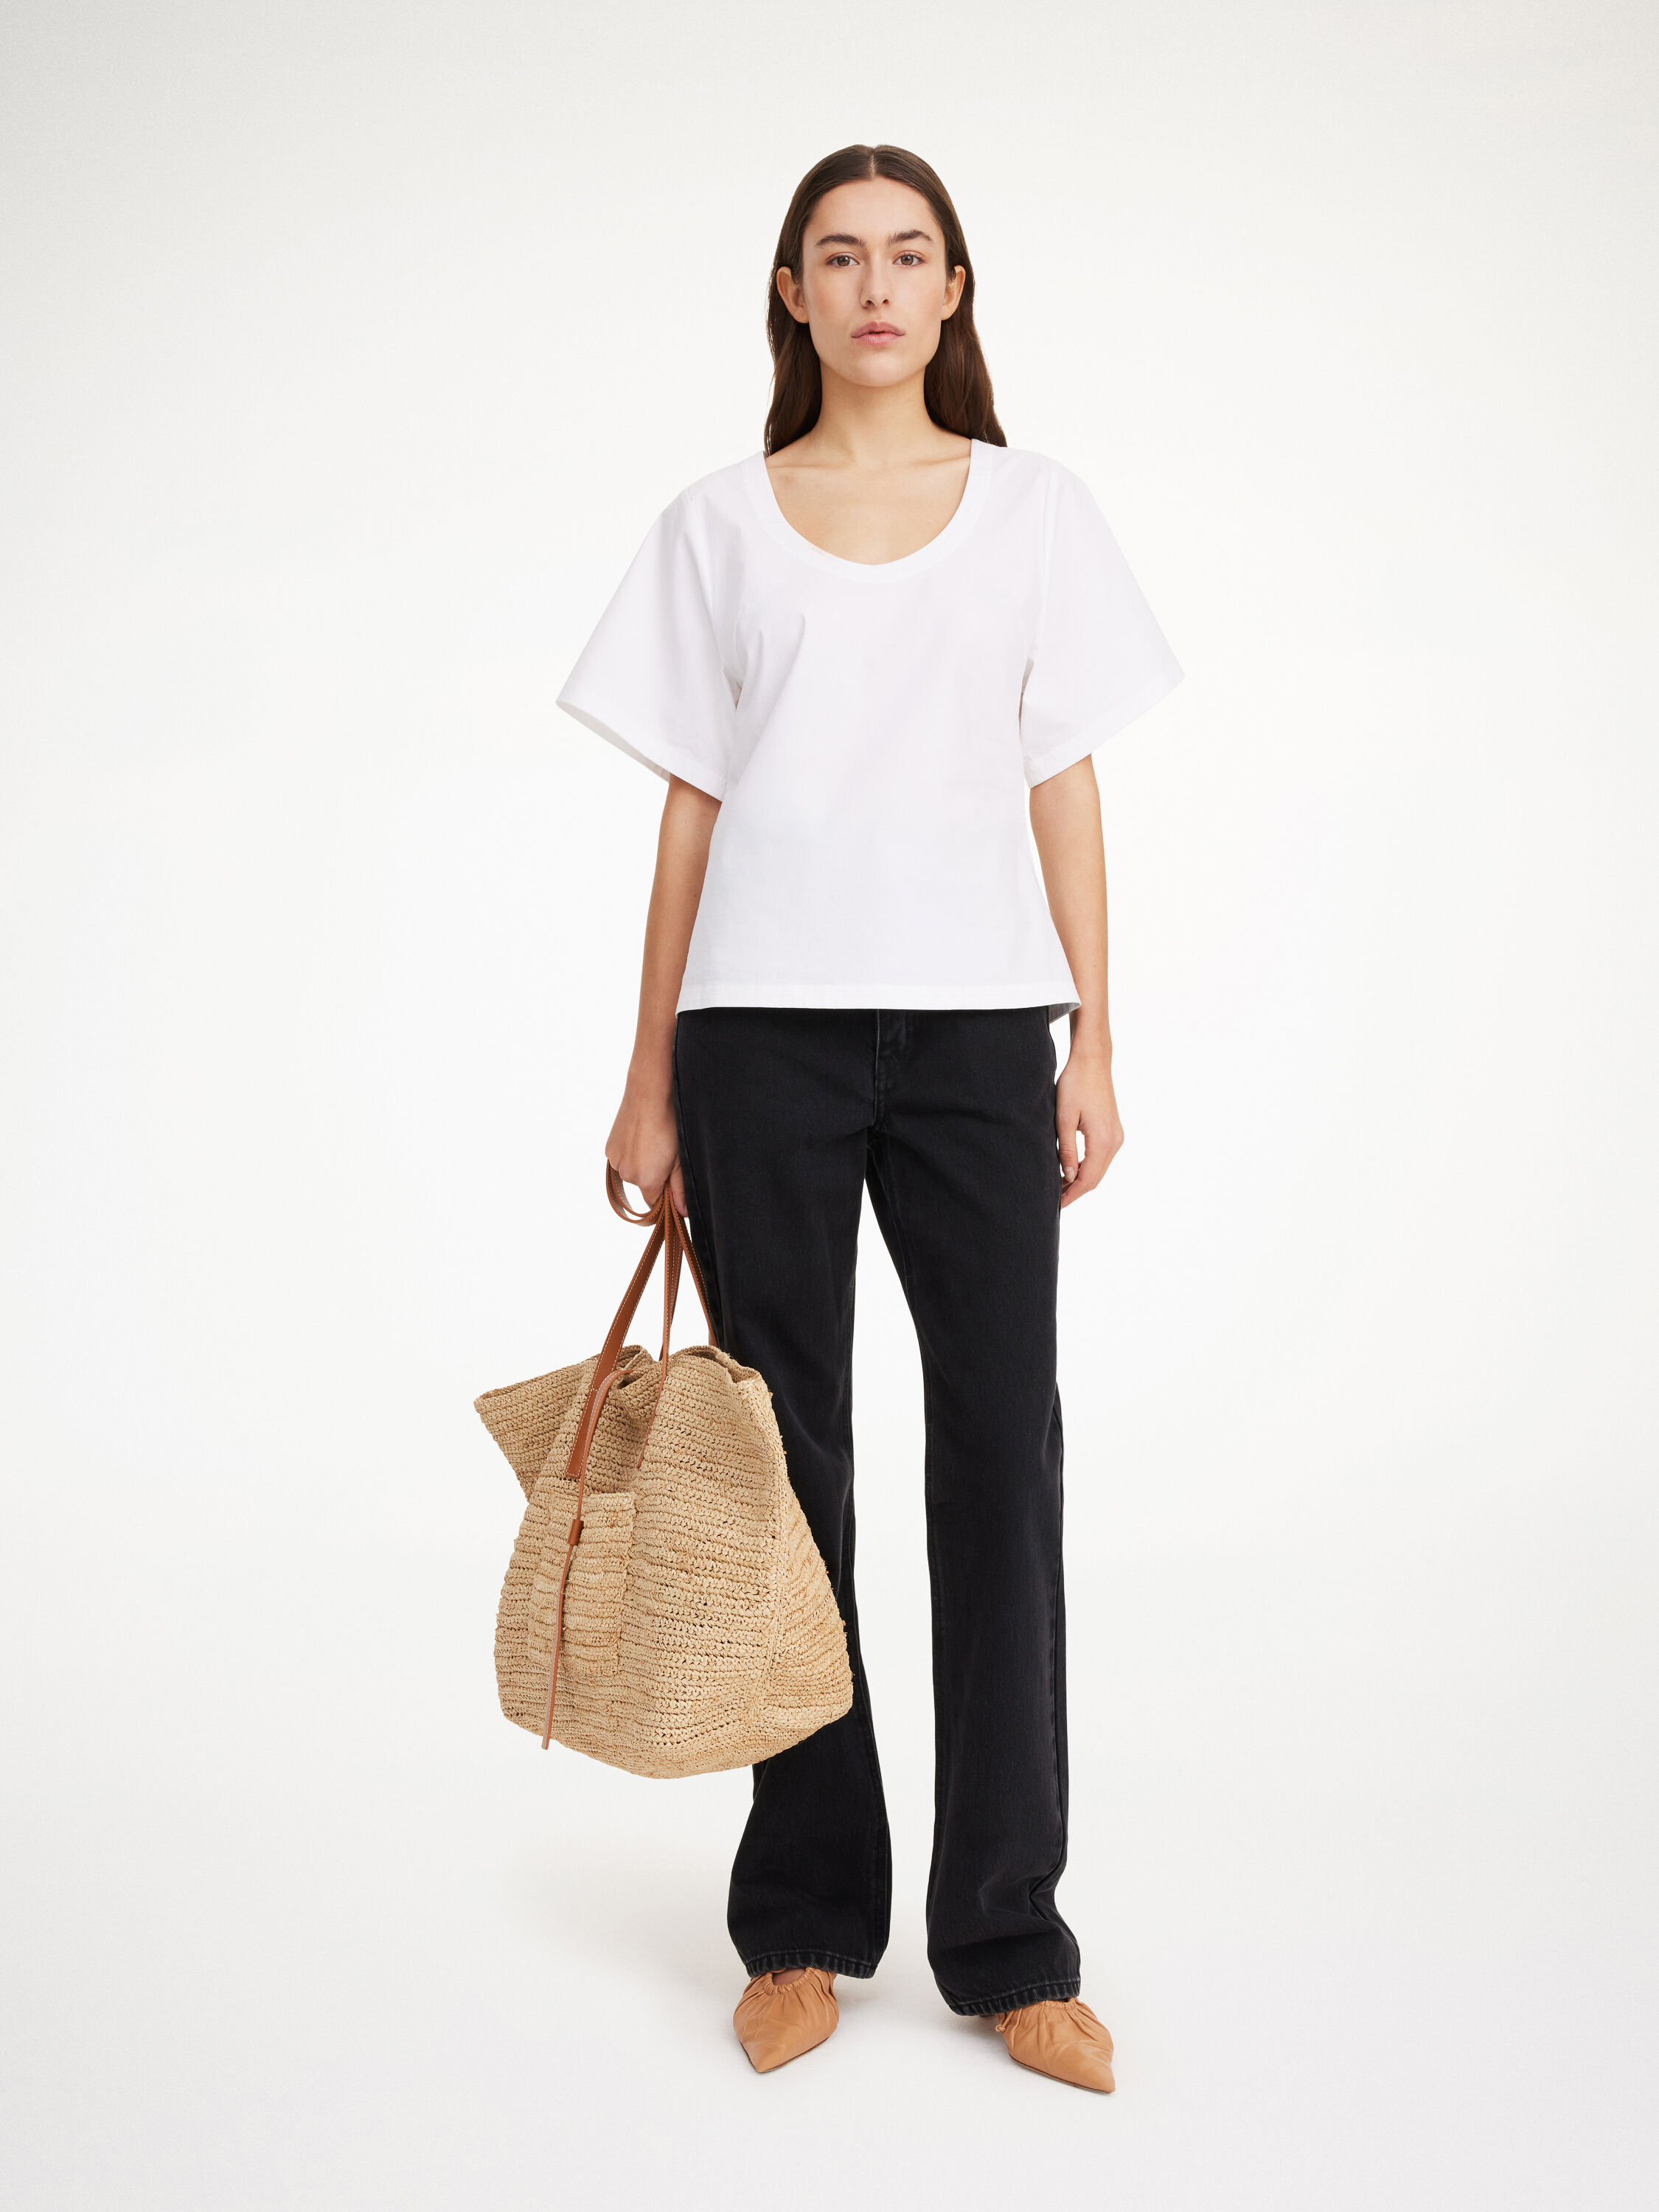 Shirts & blouses | Explore all styles here | By Malene Birger